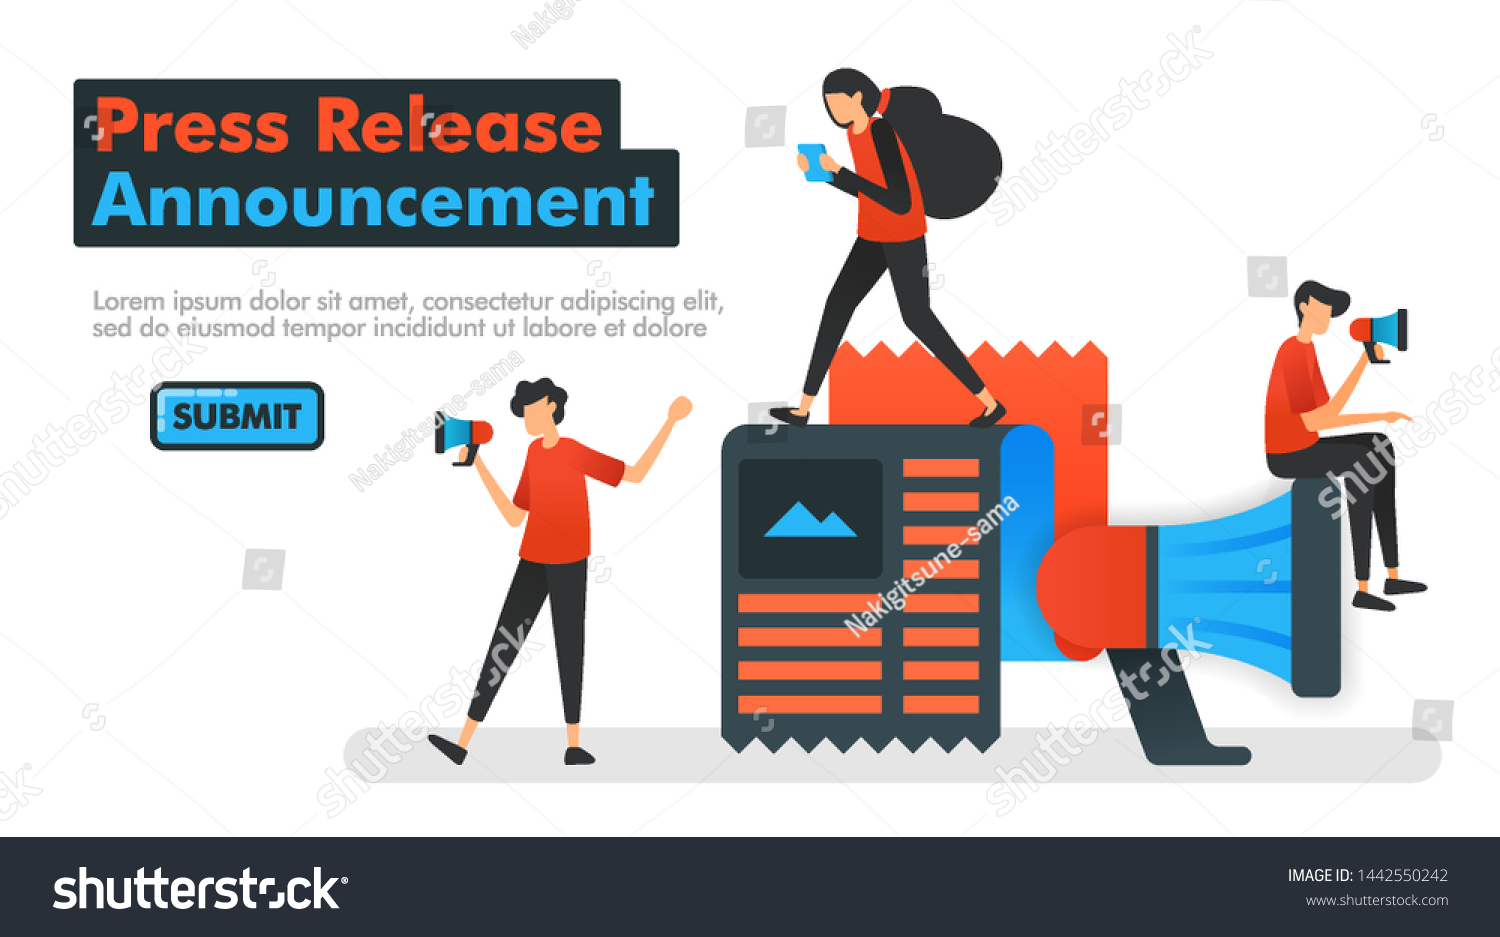 Press Release Announcement Vector Illustration People Stock Vector ...